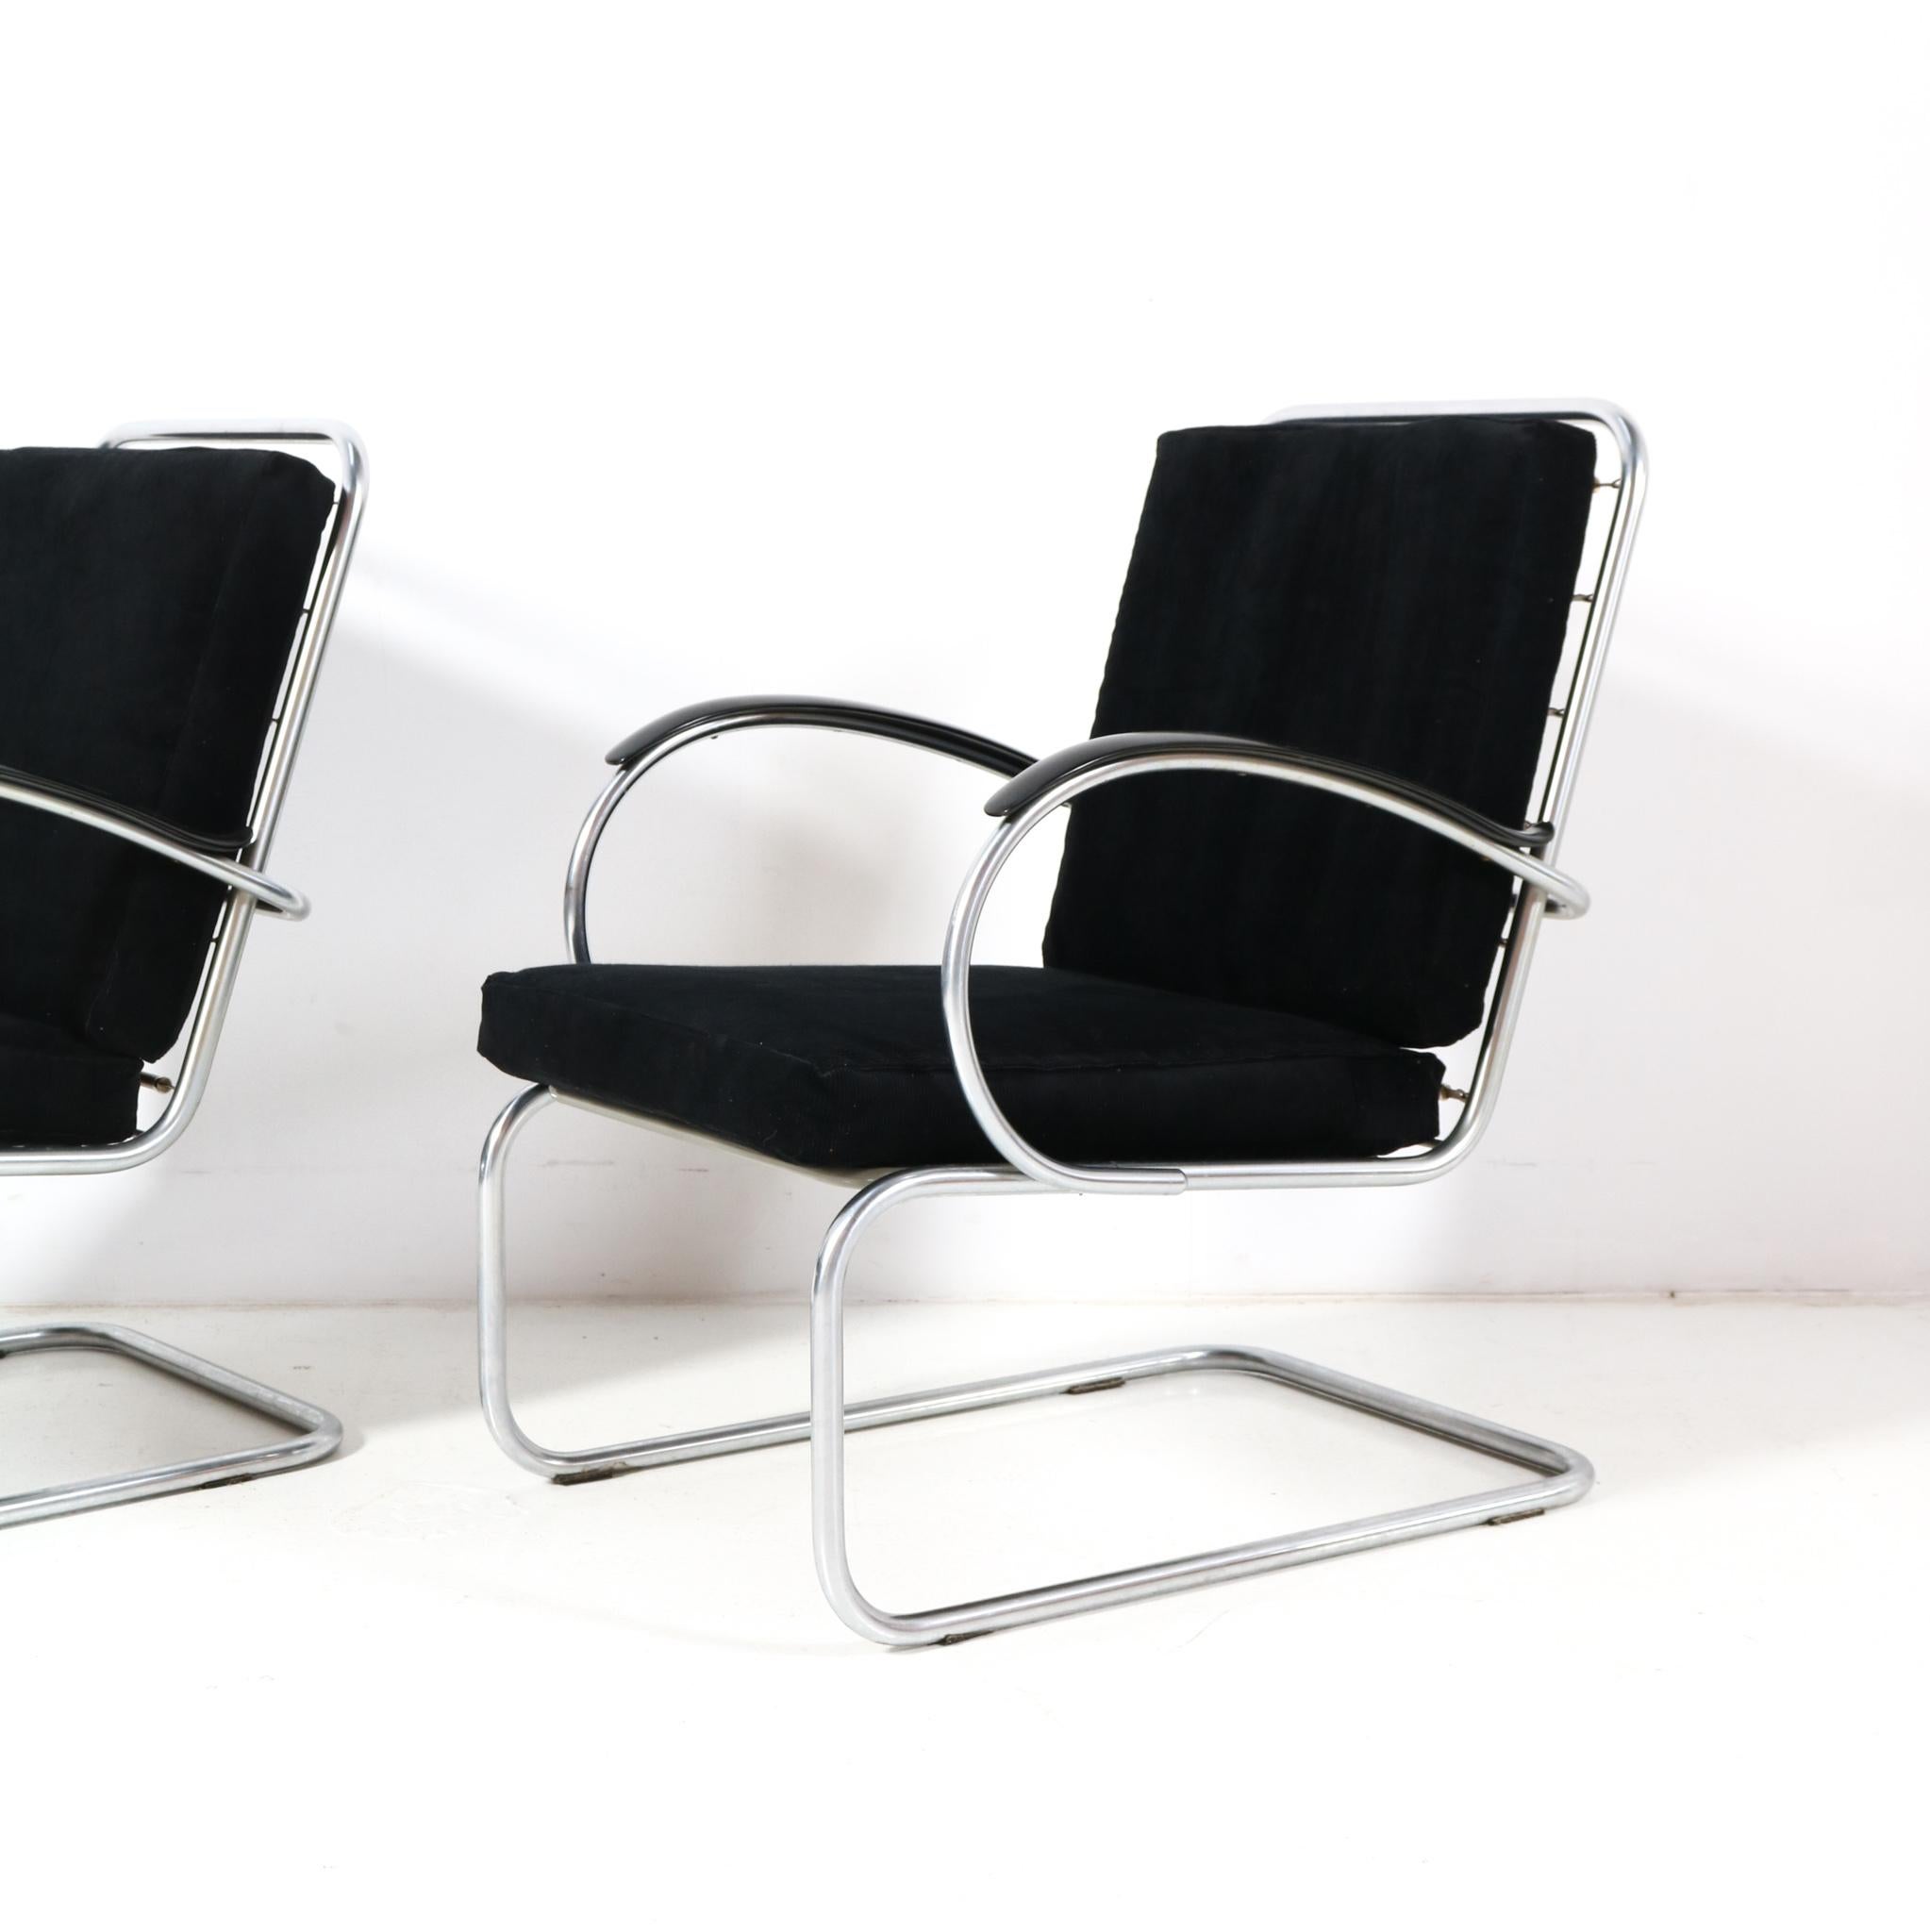 Two Art Deco Bauhaus Model 409 Lounge Chairs by W.H. Gispen for Gispen, 1930s For Sale 1